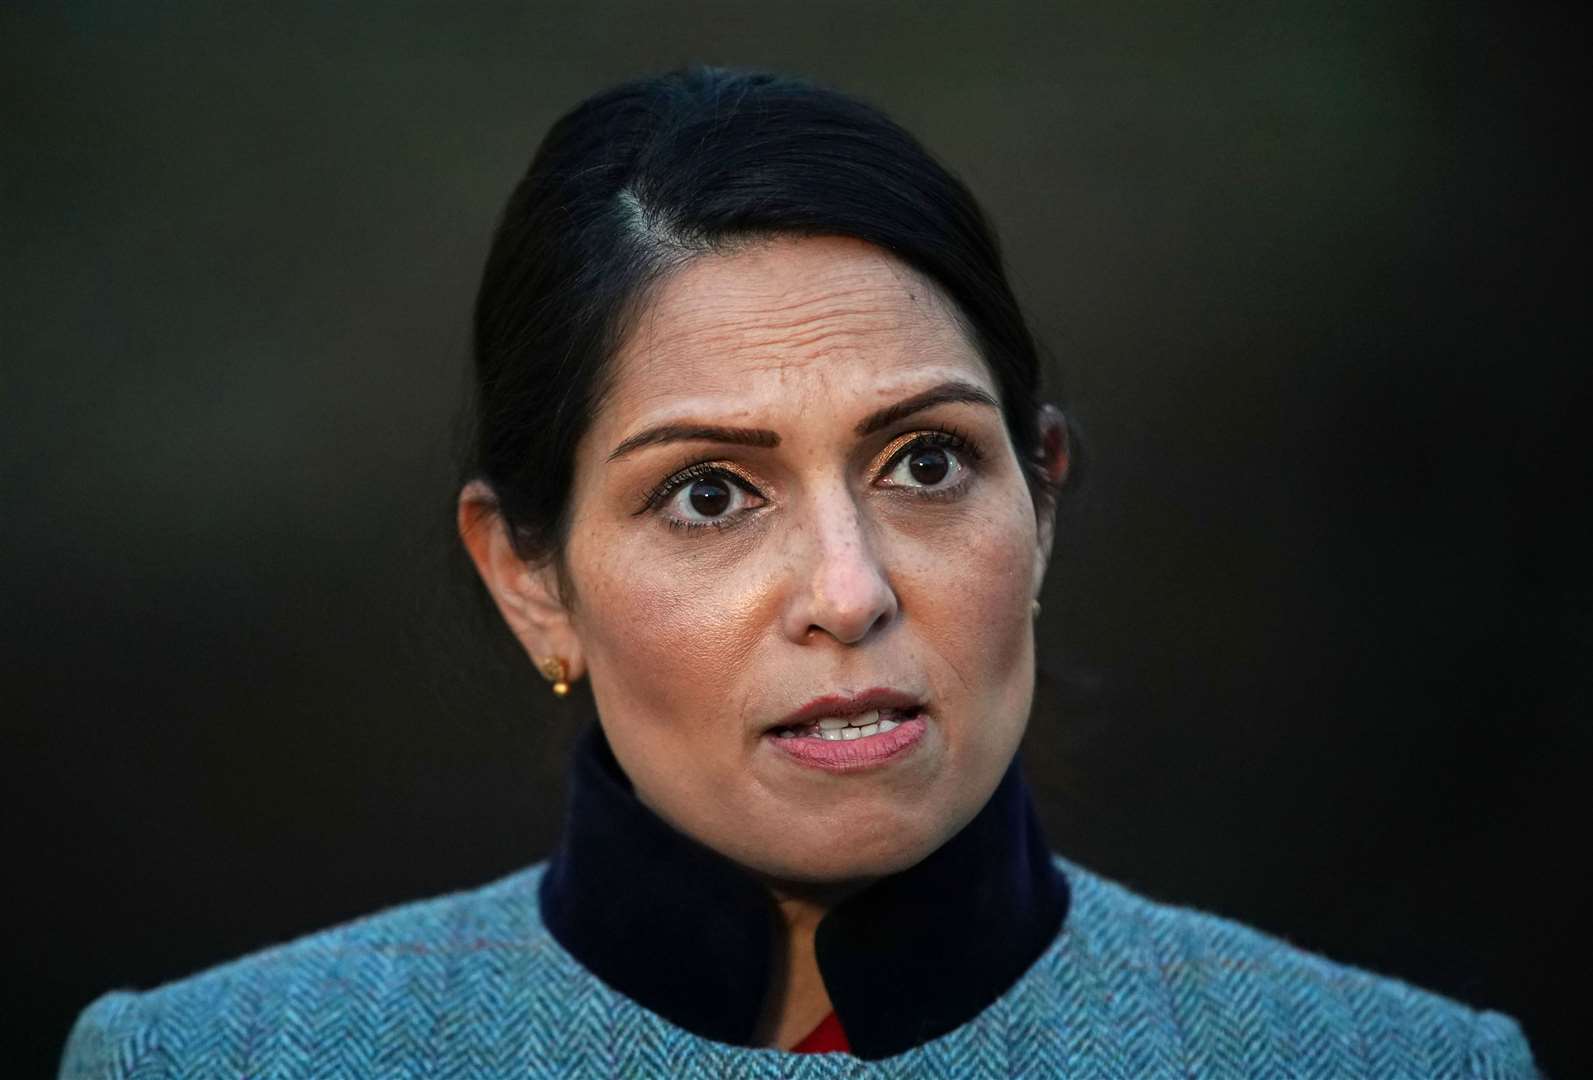 Home Secretary Priti Patel has said the safety of women and girls across the country was an ‘absolute priority’ (Aaron Chown/PA)